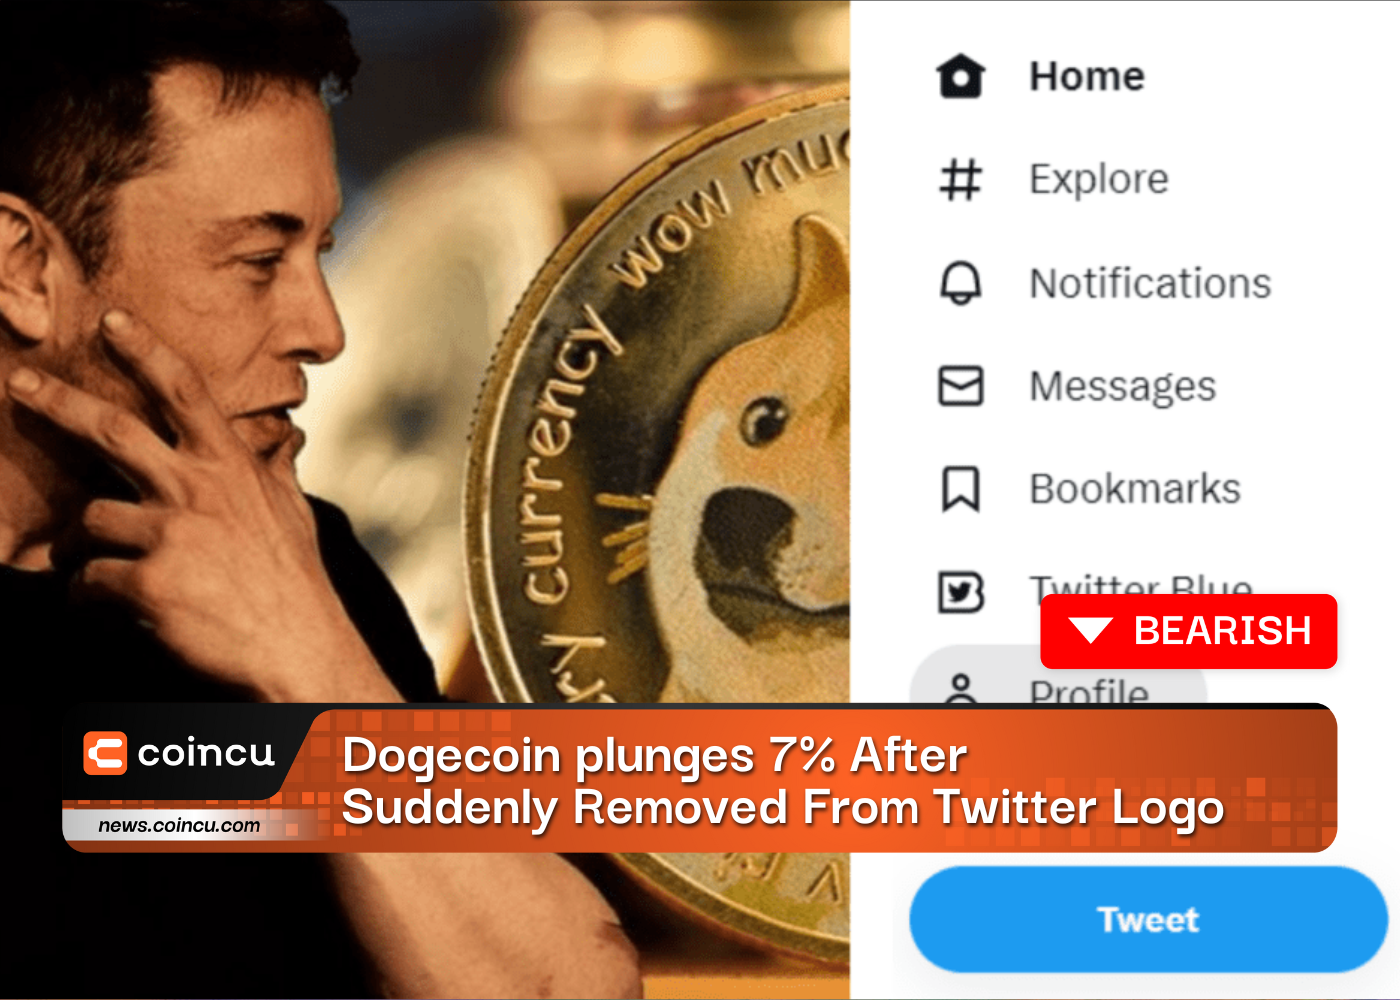 Dogecoin plunges 7% After Suddenly Removed From Twitter Logo